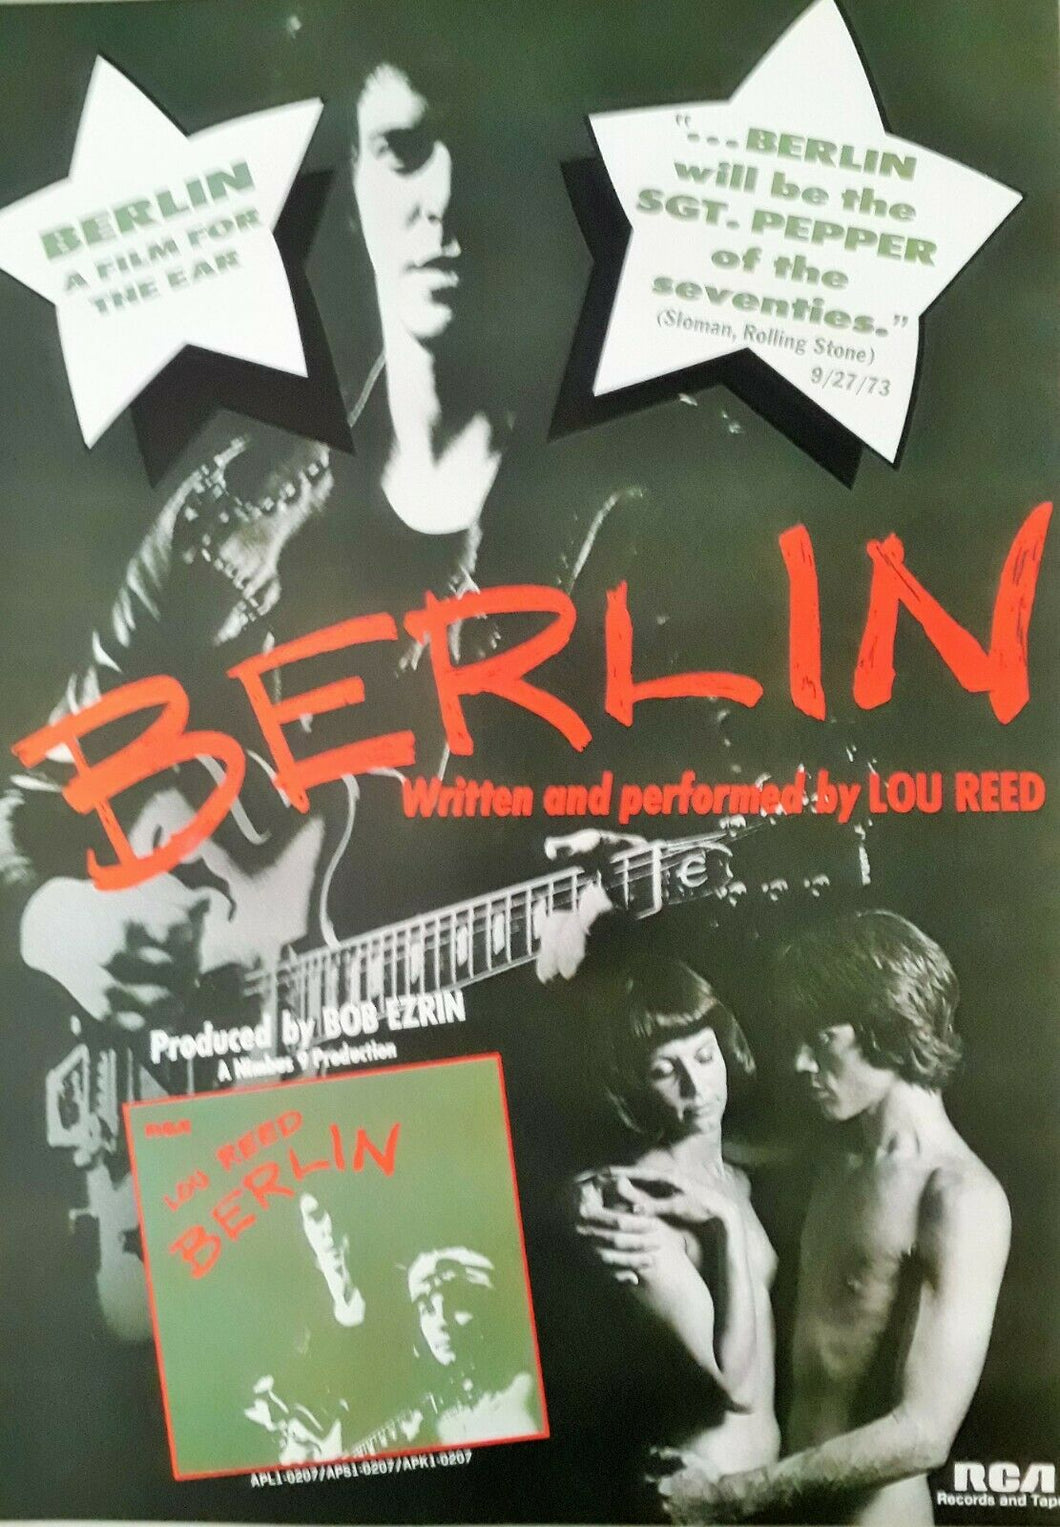 Lou Reed promo poster - Berlin album 1973 Velvet Underground reprinted edition - Original Music and Movie Posters for sale from Bamalama - Online Poster Store UK London